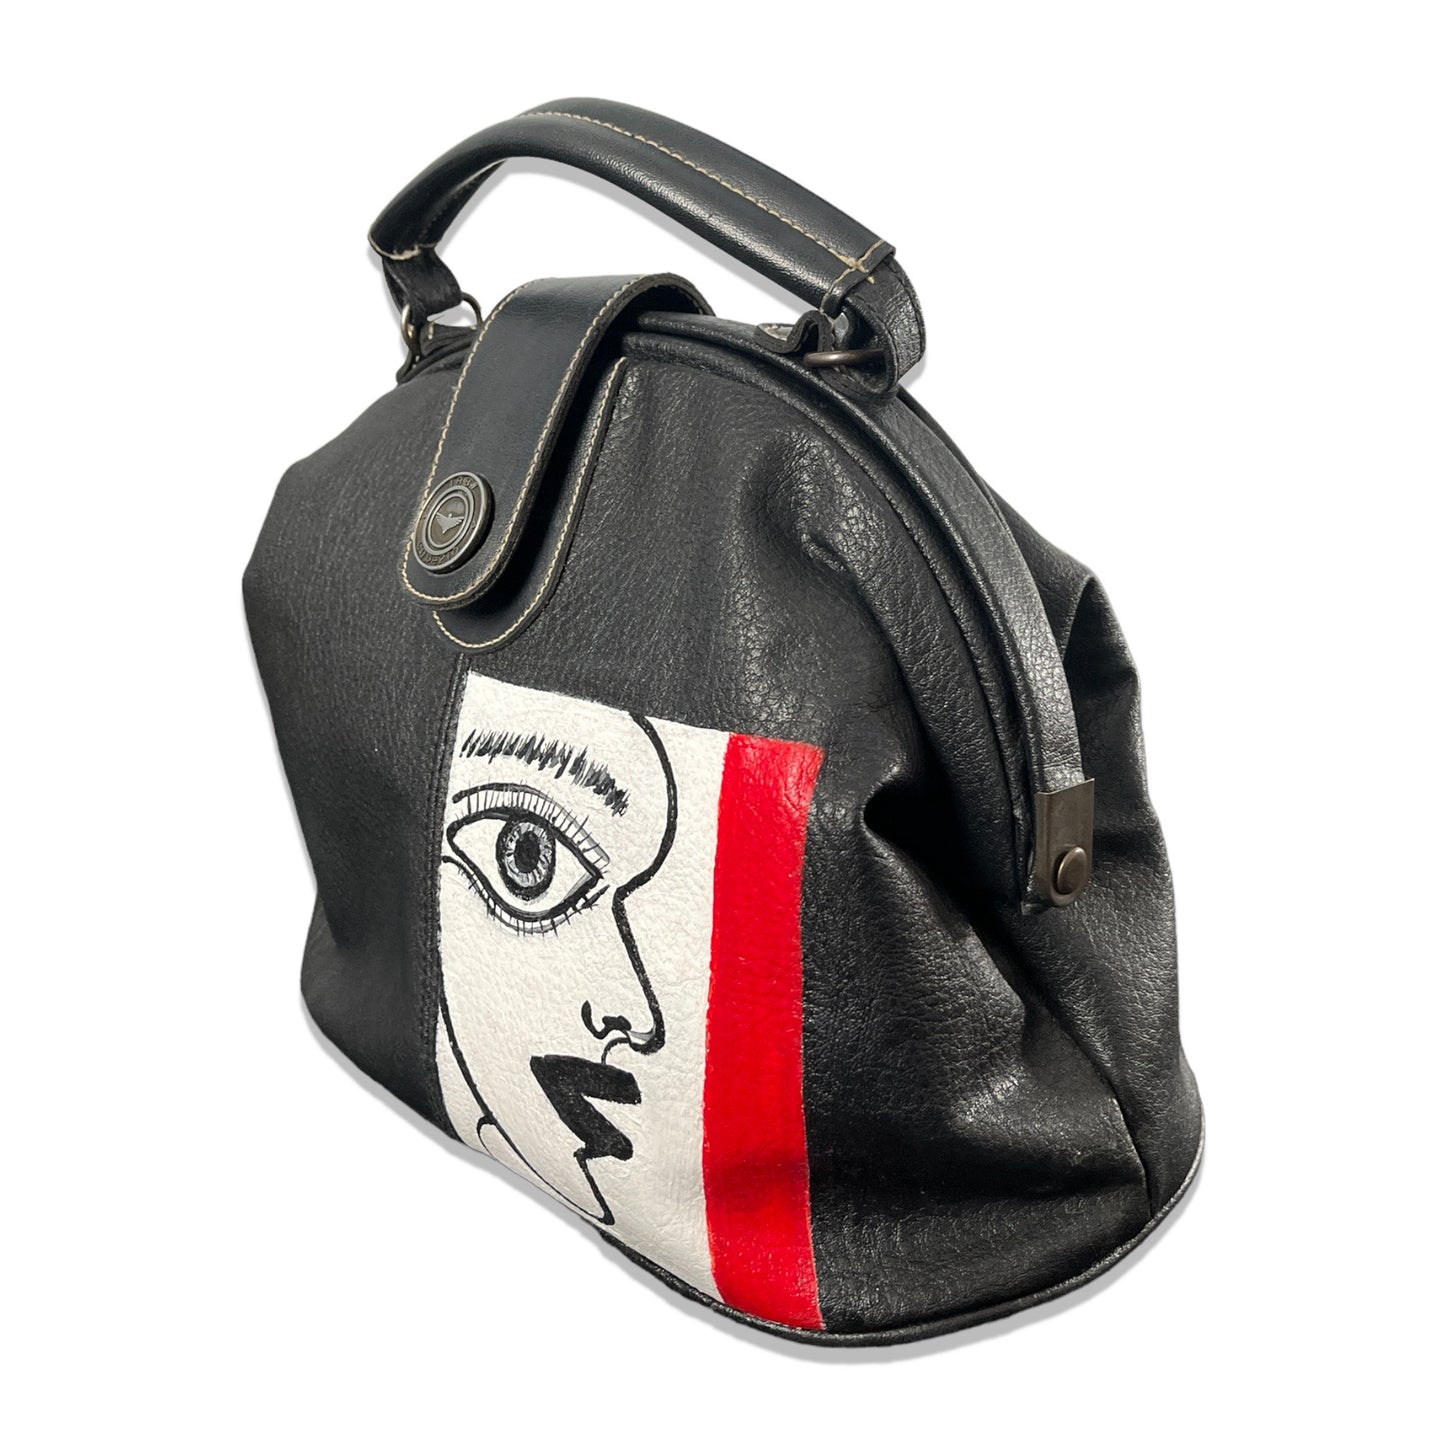 "Dr. Lyndsey" Capezio Handbag - Painted by Temporarily Not Famous